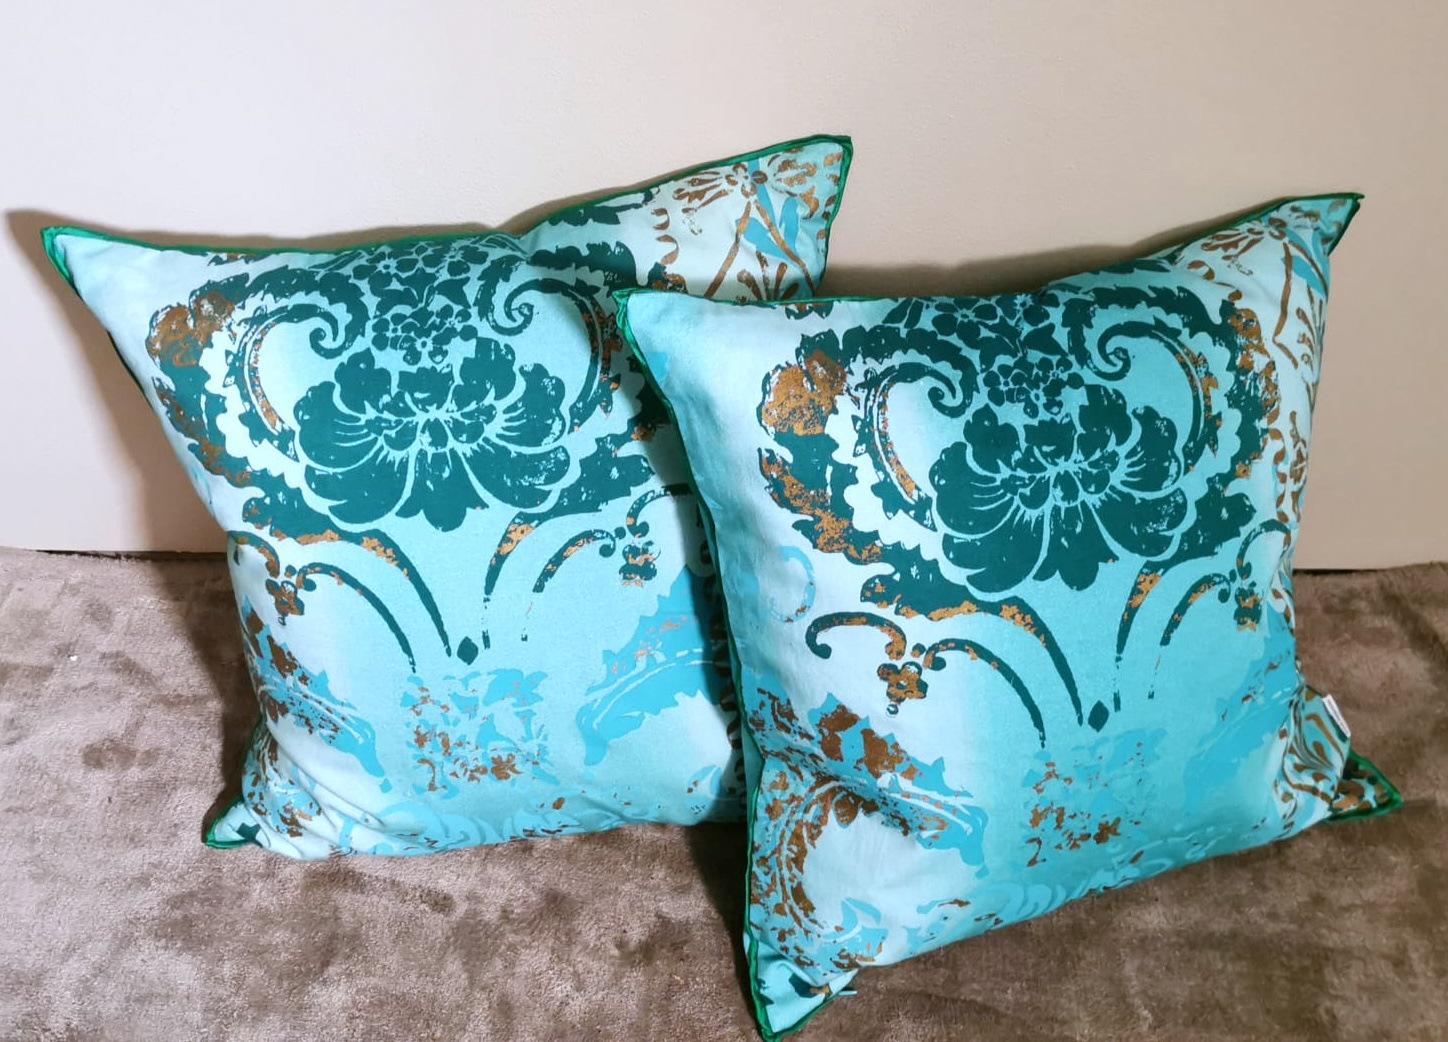 We kindly suggest you read the whole description, because with it we try to give you detailed technical and historical information to guarantee the authenticity of our objects.
Elegant and sophisticated pair of pillows; they were handmade of